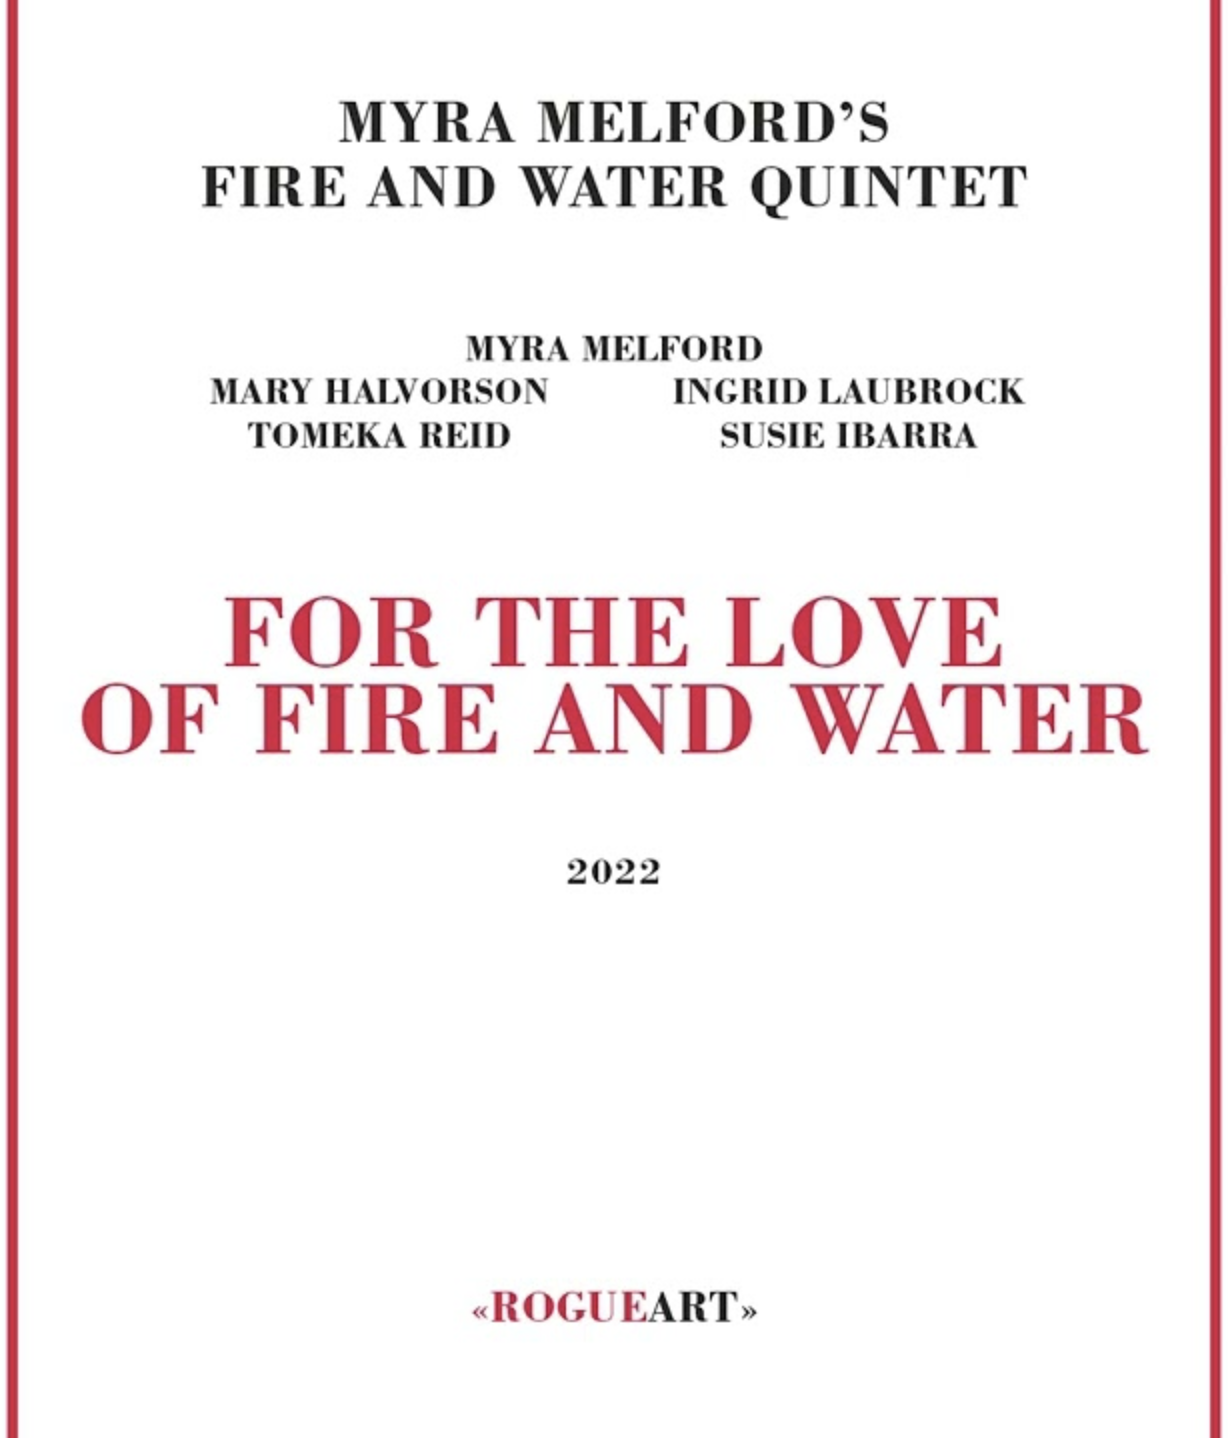 Myra Melford’s Fire and Water Quintet: For the Love of Fire and Water